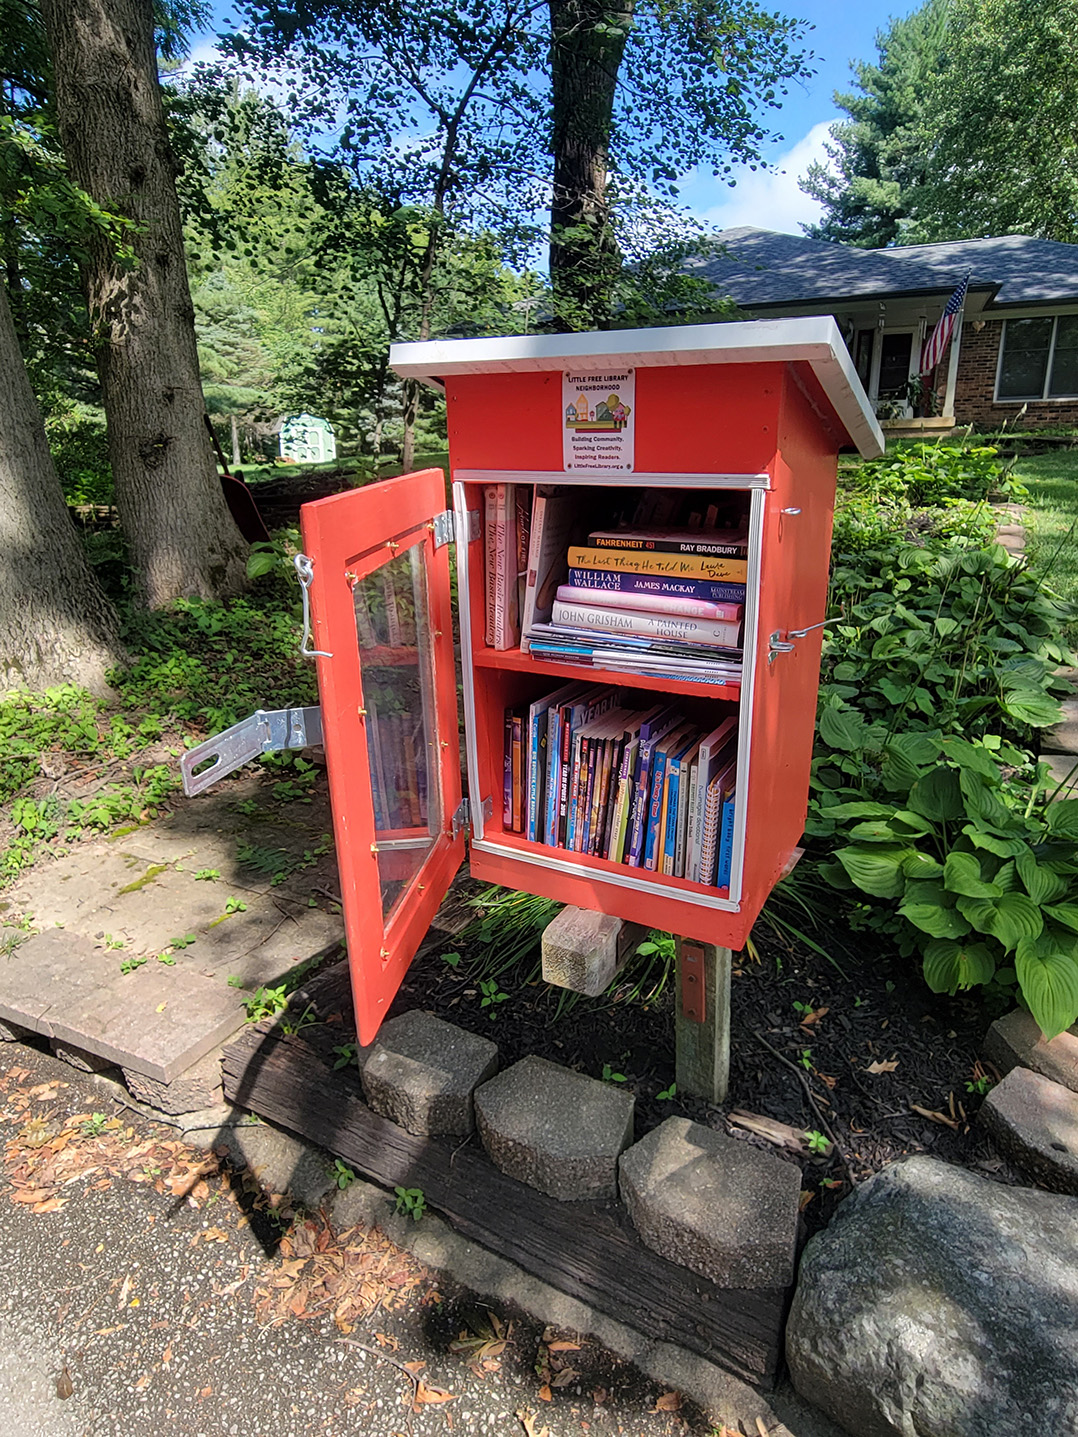 Spreading the (written) word: Little Free Libraries provide easy access to books for kids